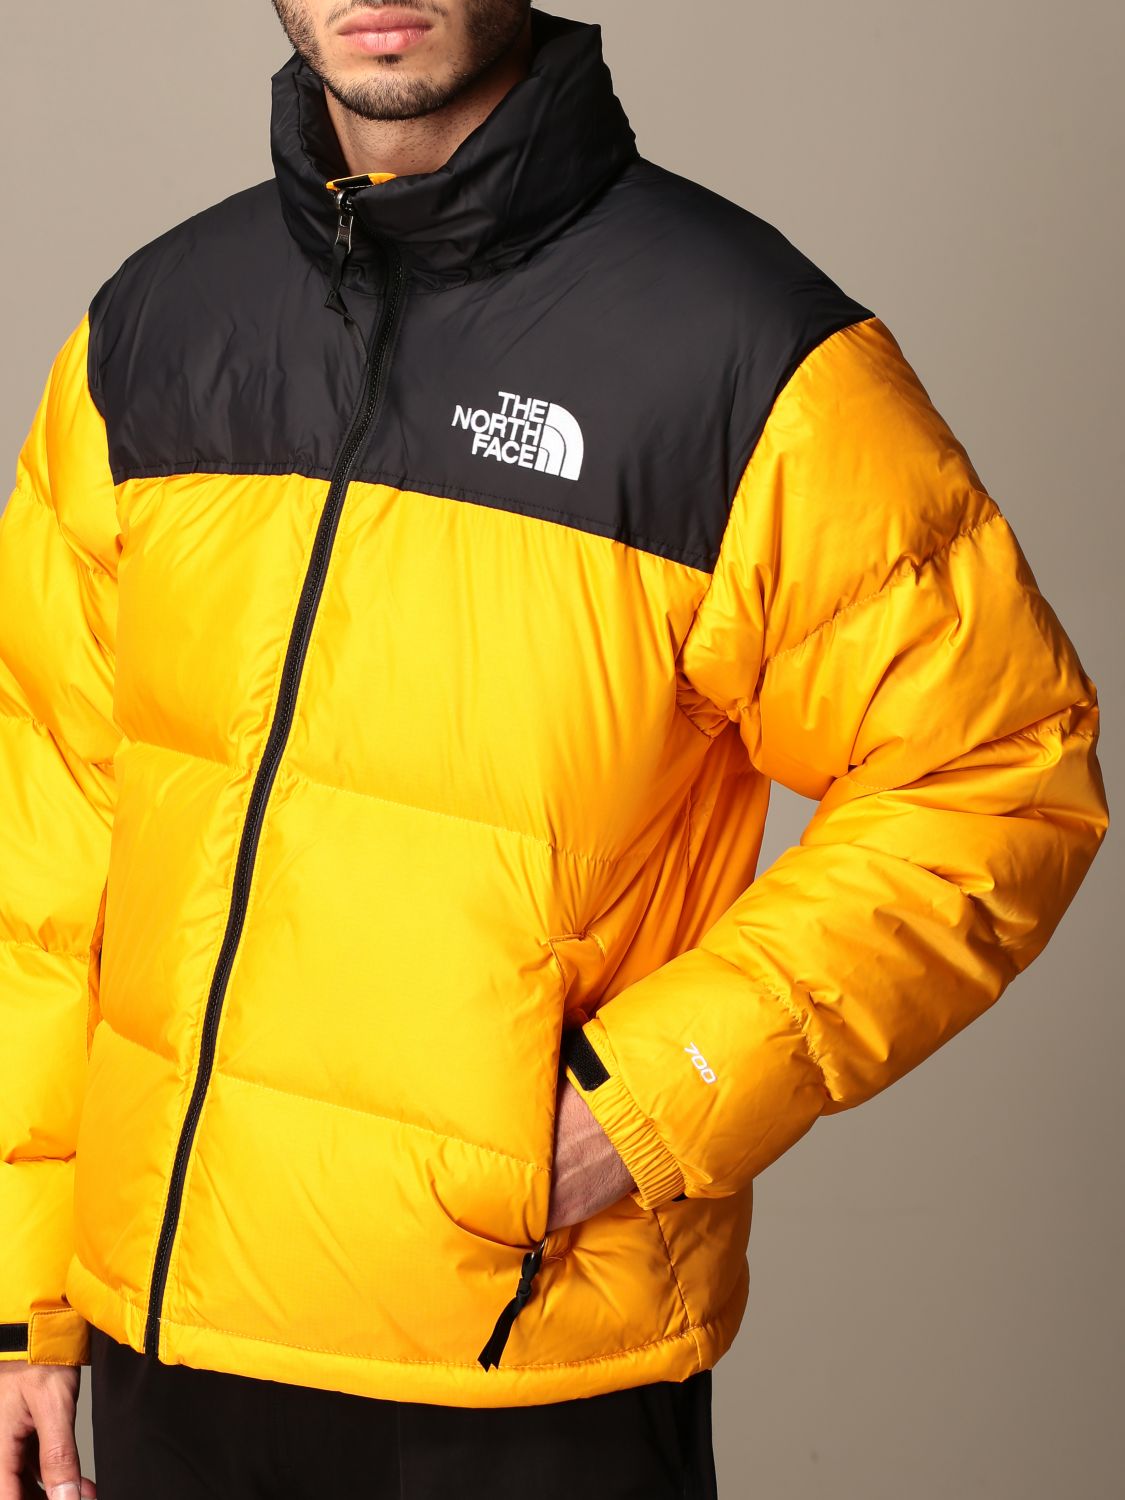 THE NORTH FACE Nuptse down jacket with logo Jacket The North Face